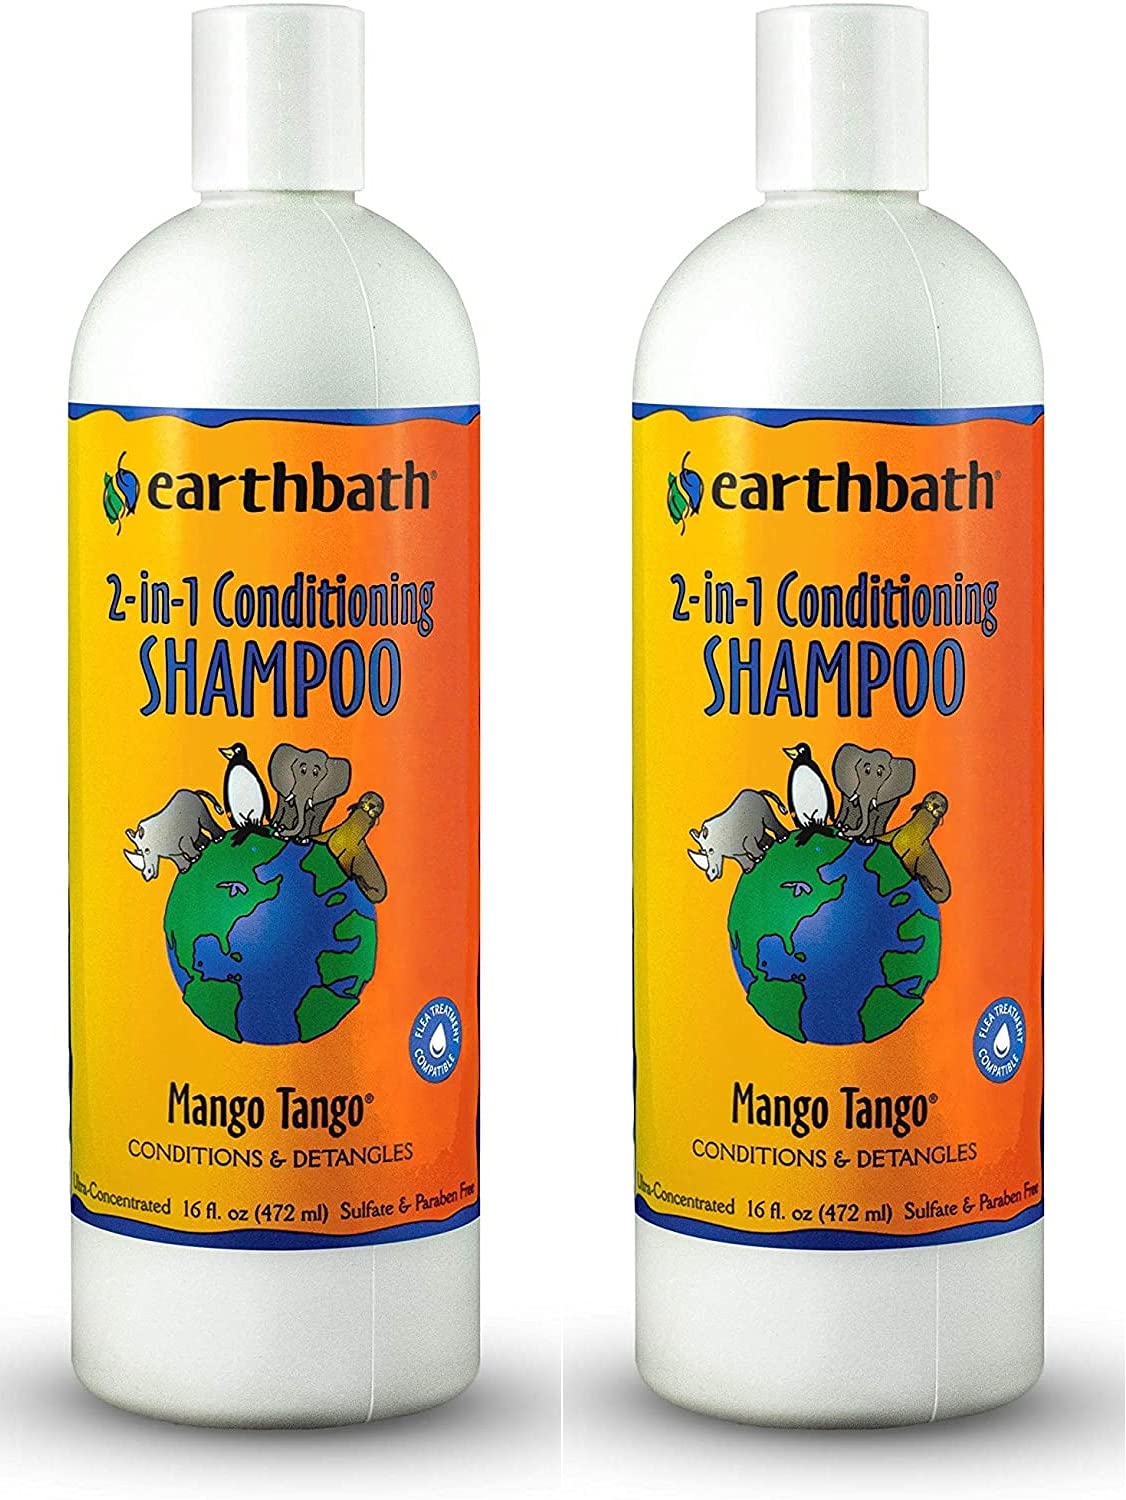 earthbath 2-in-1 Conditioning Shampoo for Pets, – Dog Shampoo and Conditioner, Conditions & Detangles, Made in USA – Mango Tango, 16oz (Pack of 2)